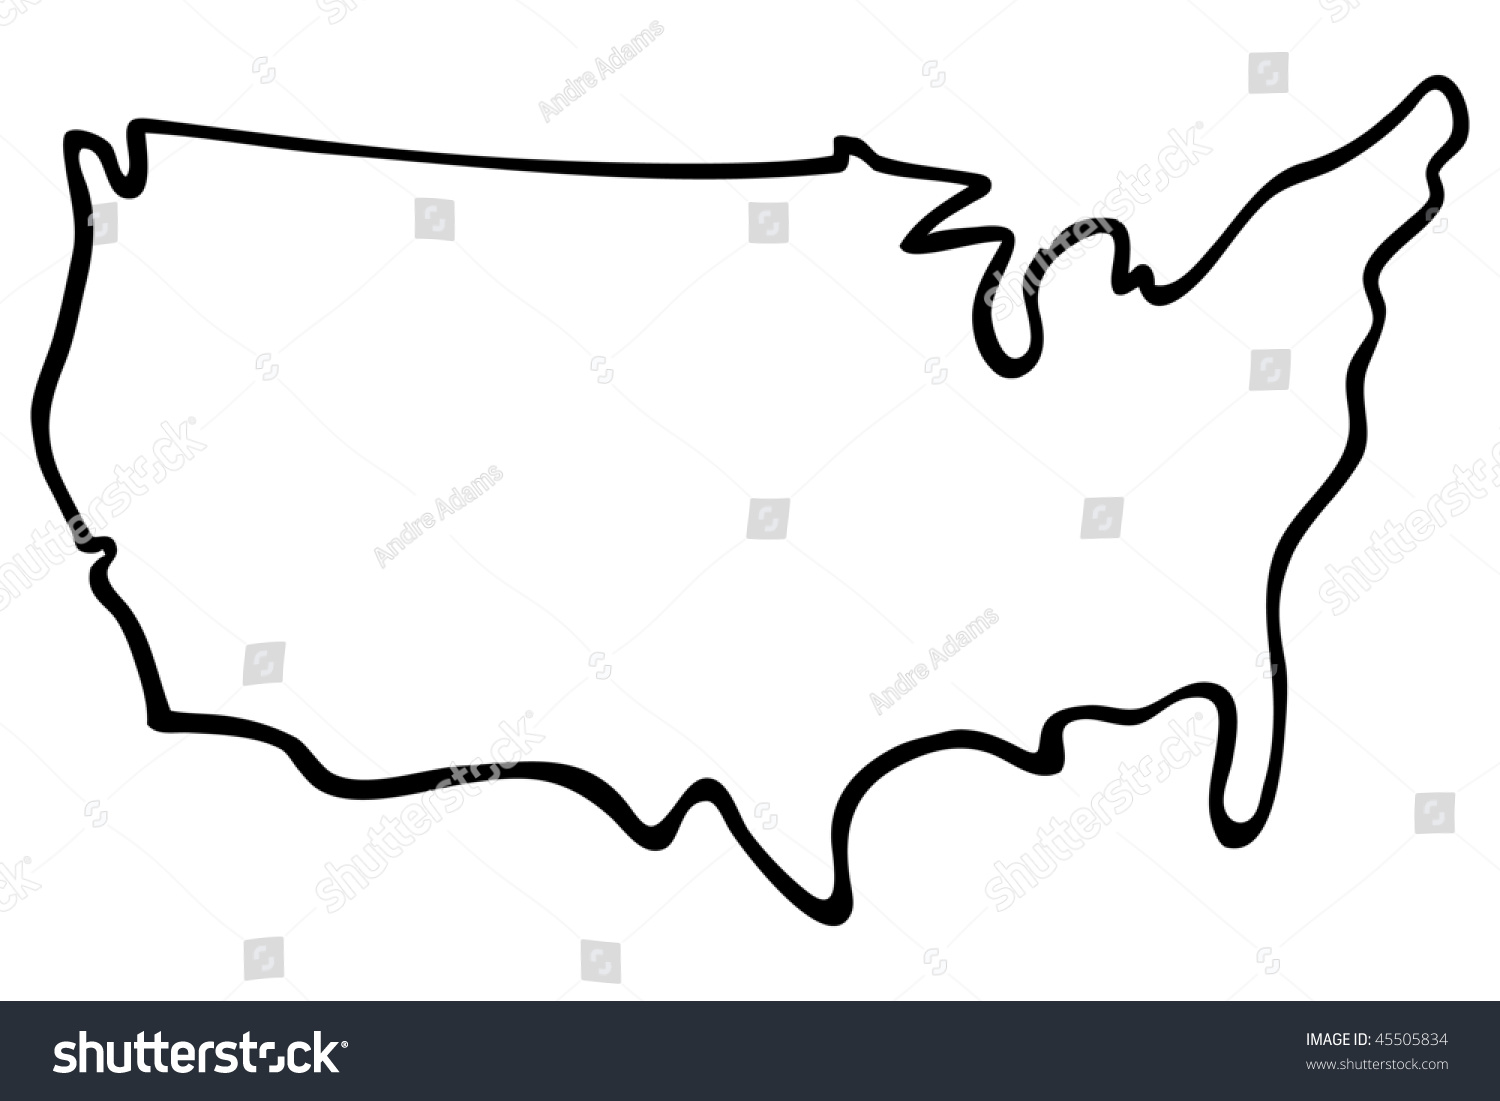 stock vector cartoon vector outline illustration united states map 45505834